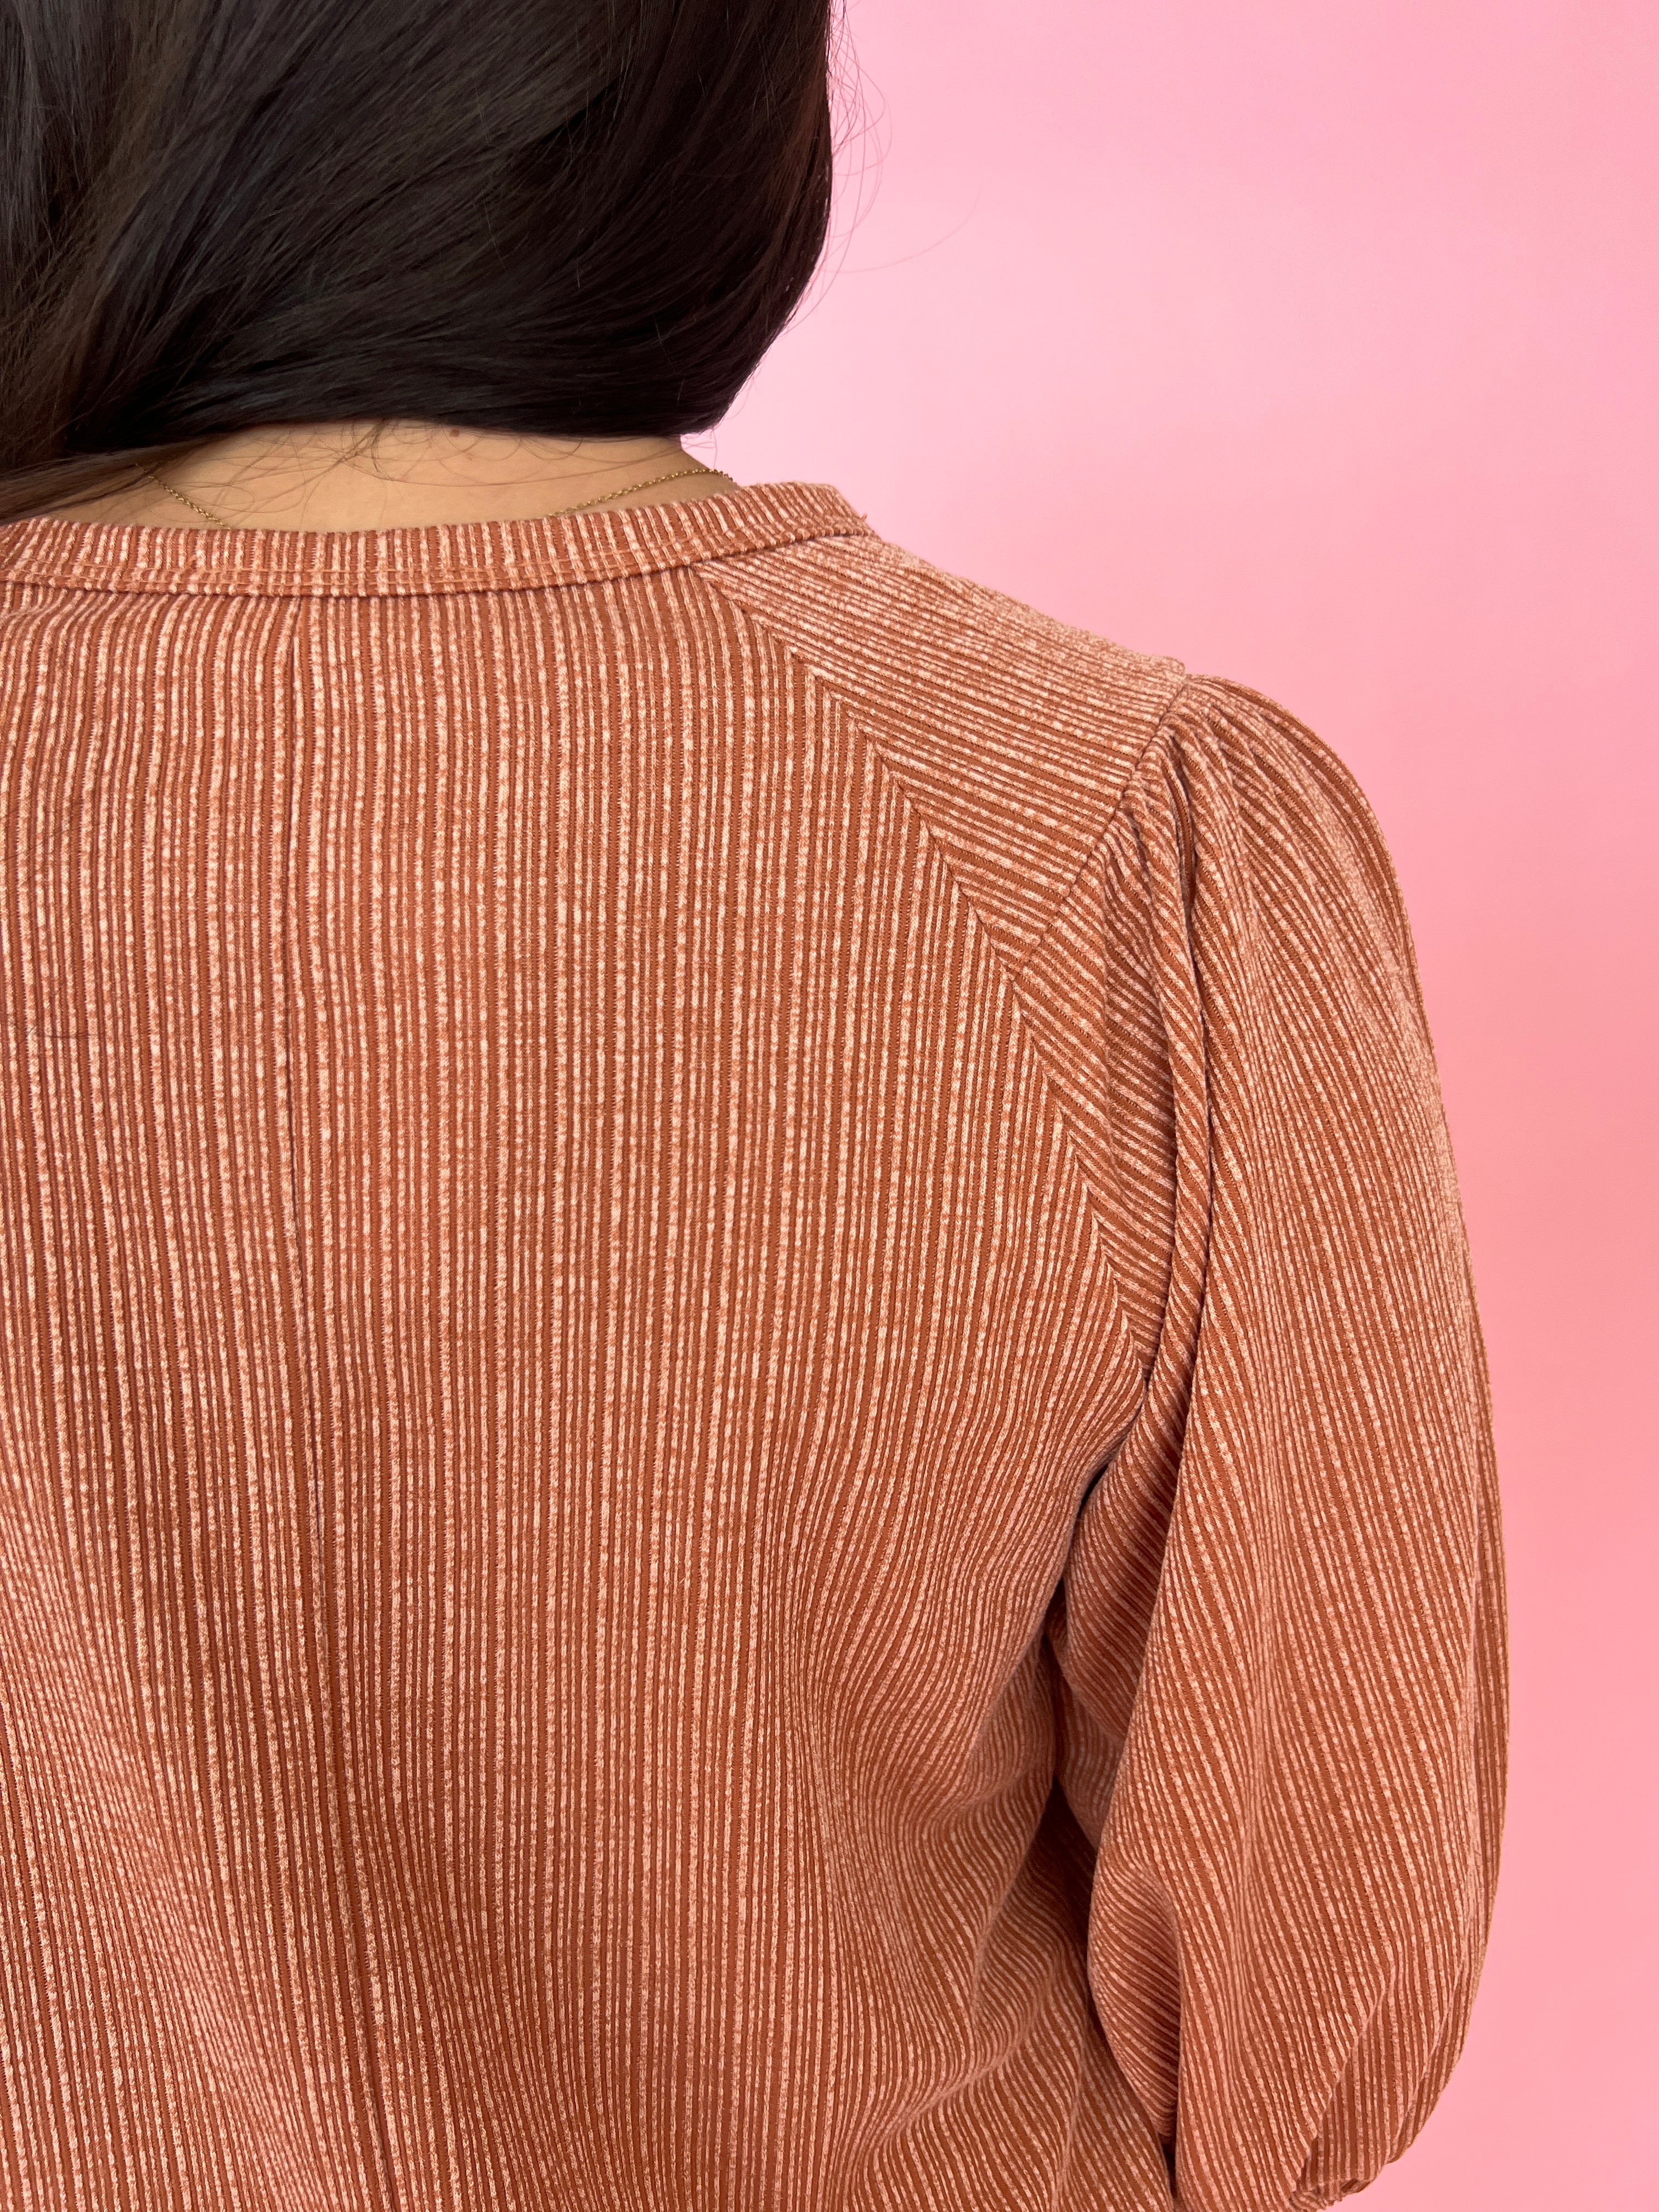 Stay Here Awhile Rust Ribbed Knit Round Neck Top-Shop-Womens-Boutique-Clothing